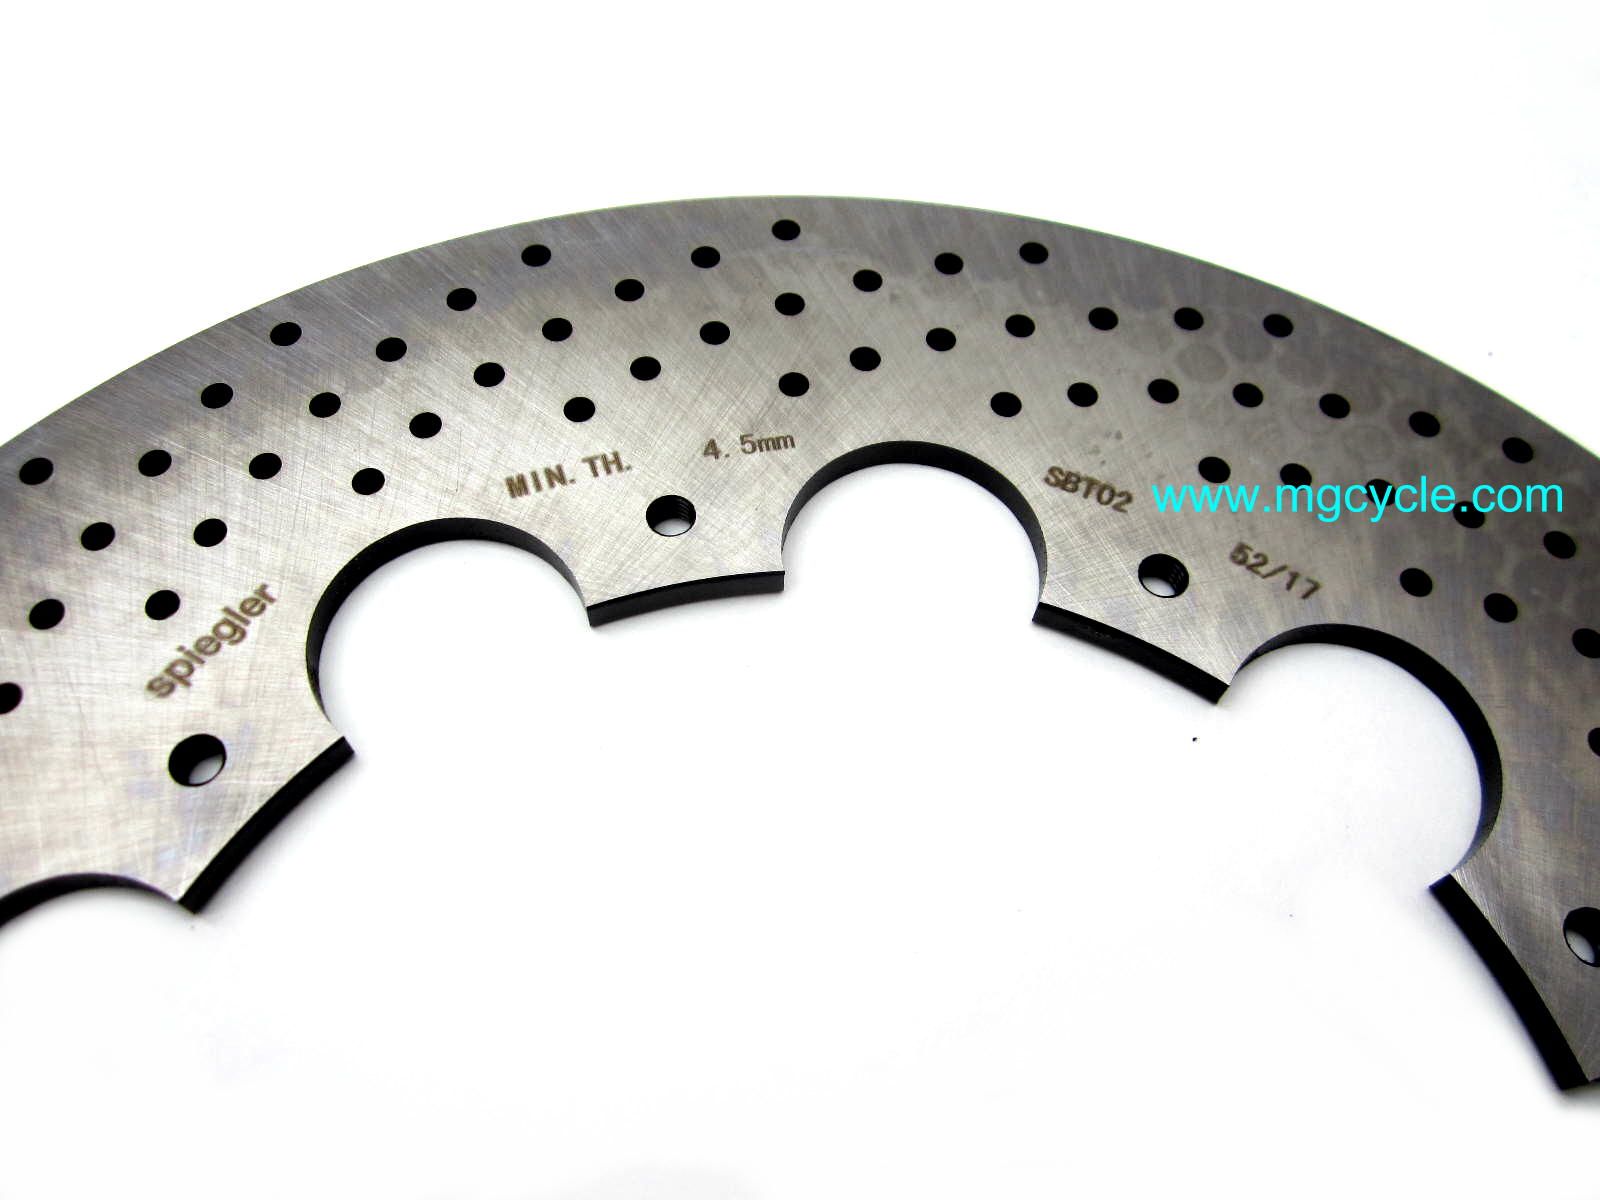 280mm drilled stainless brake disc Ducati bevel, front and rear